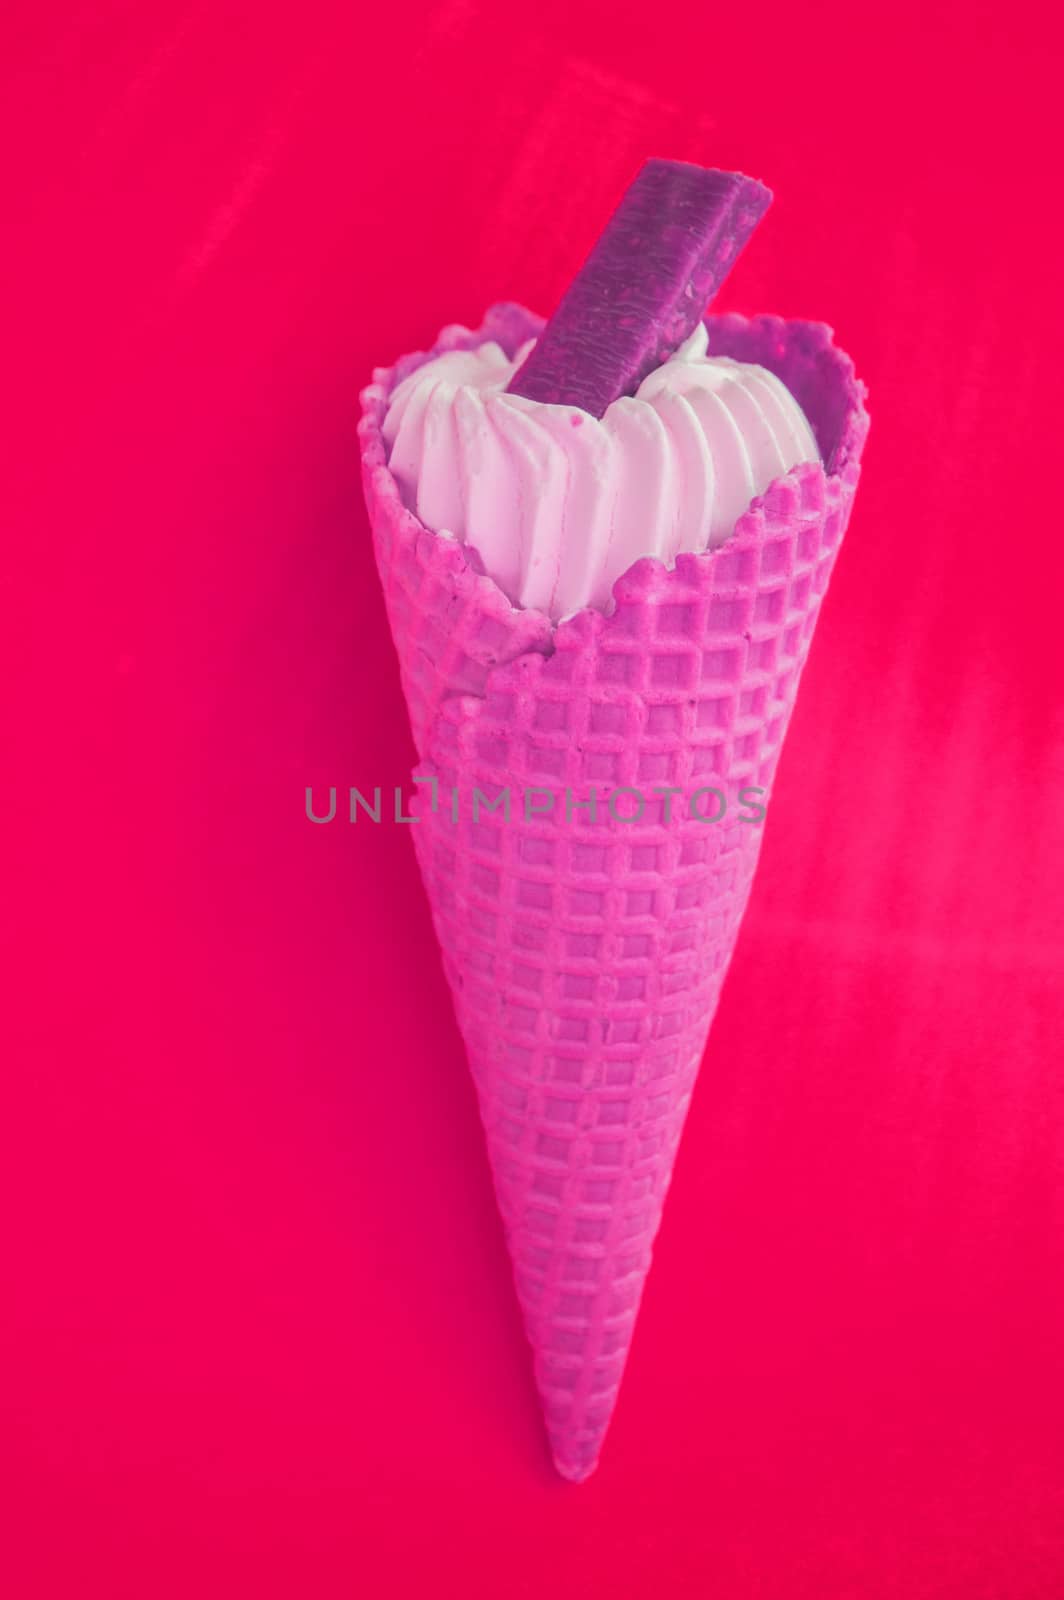 Ice cream CONE NEON COLORS pop art Flatley art, hot pink background by claire_lucia